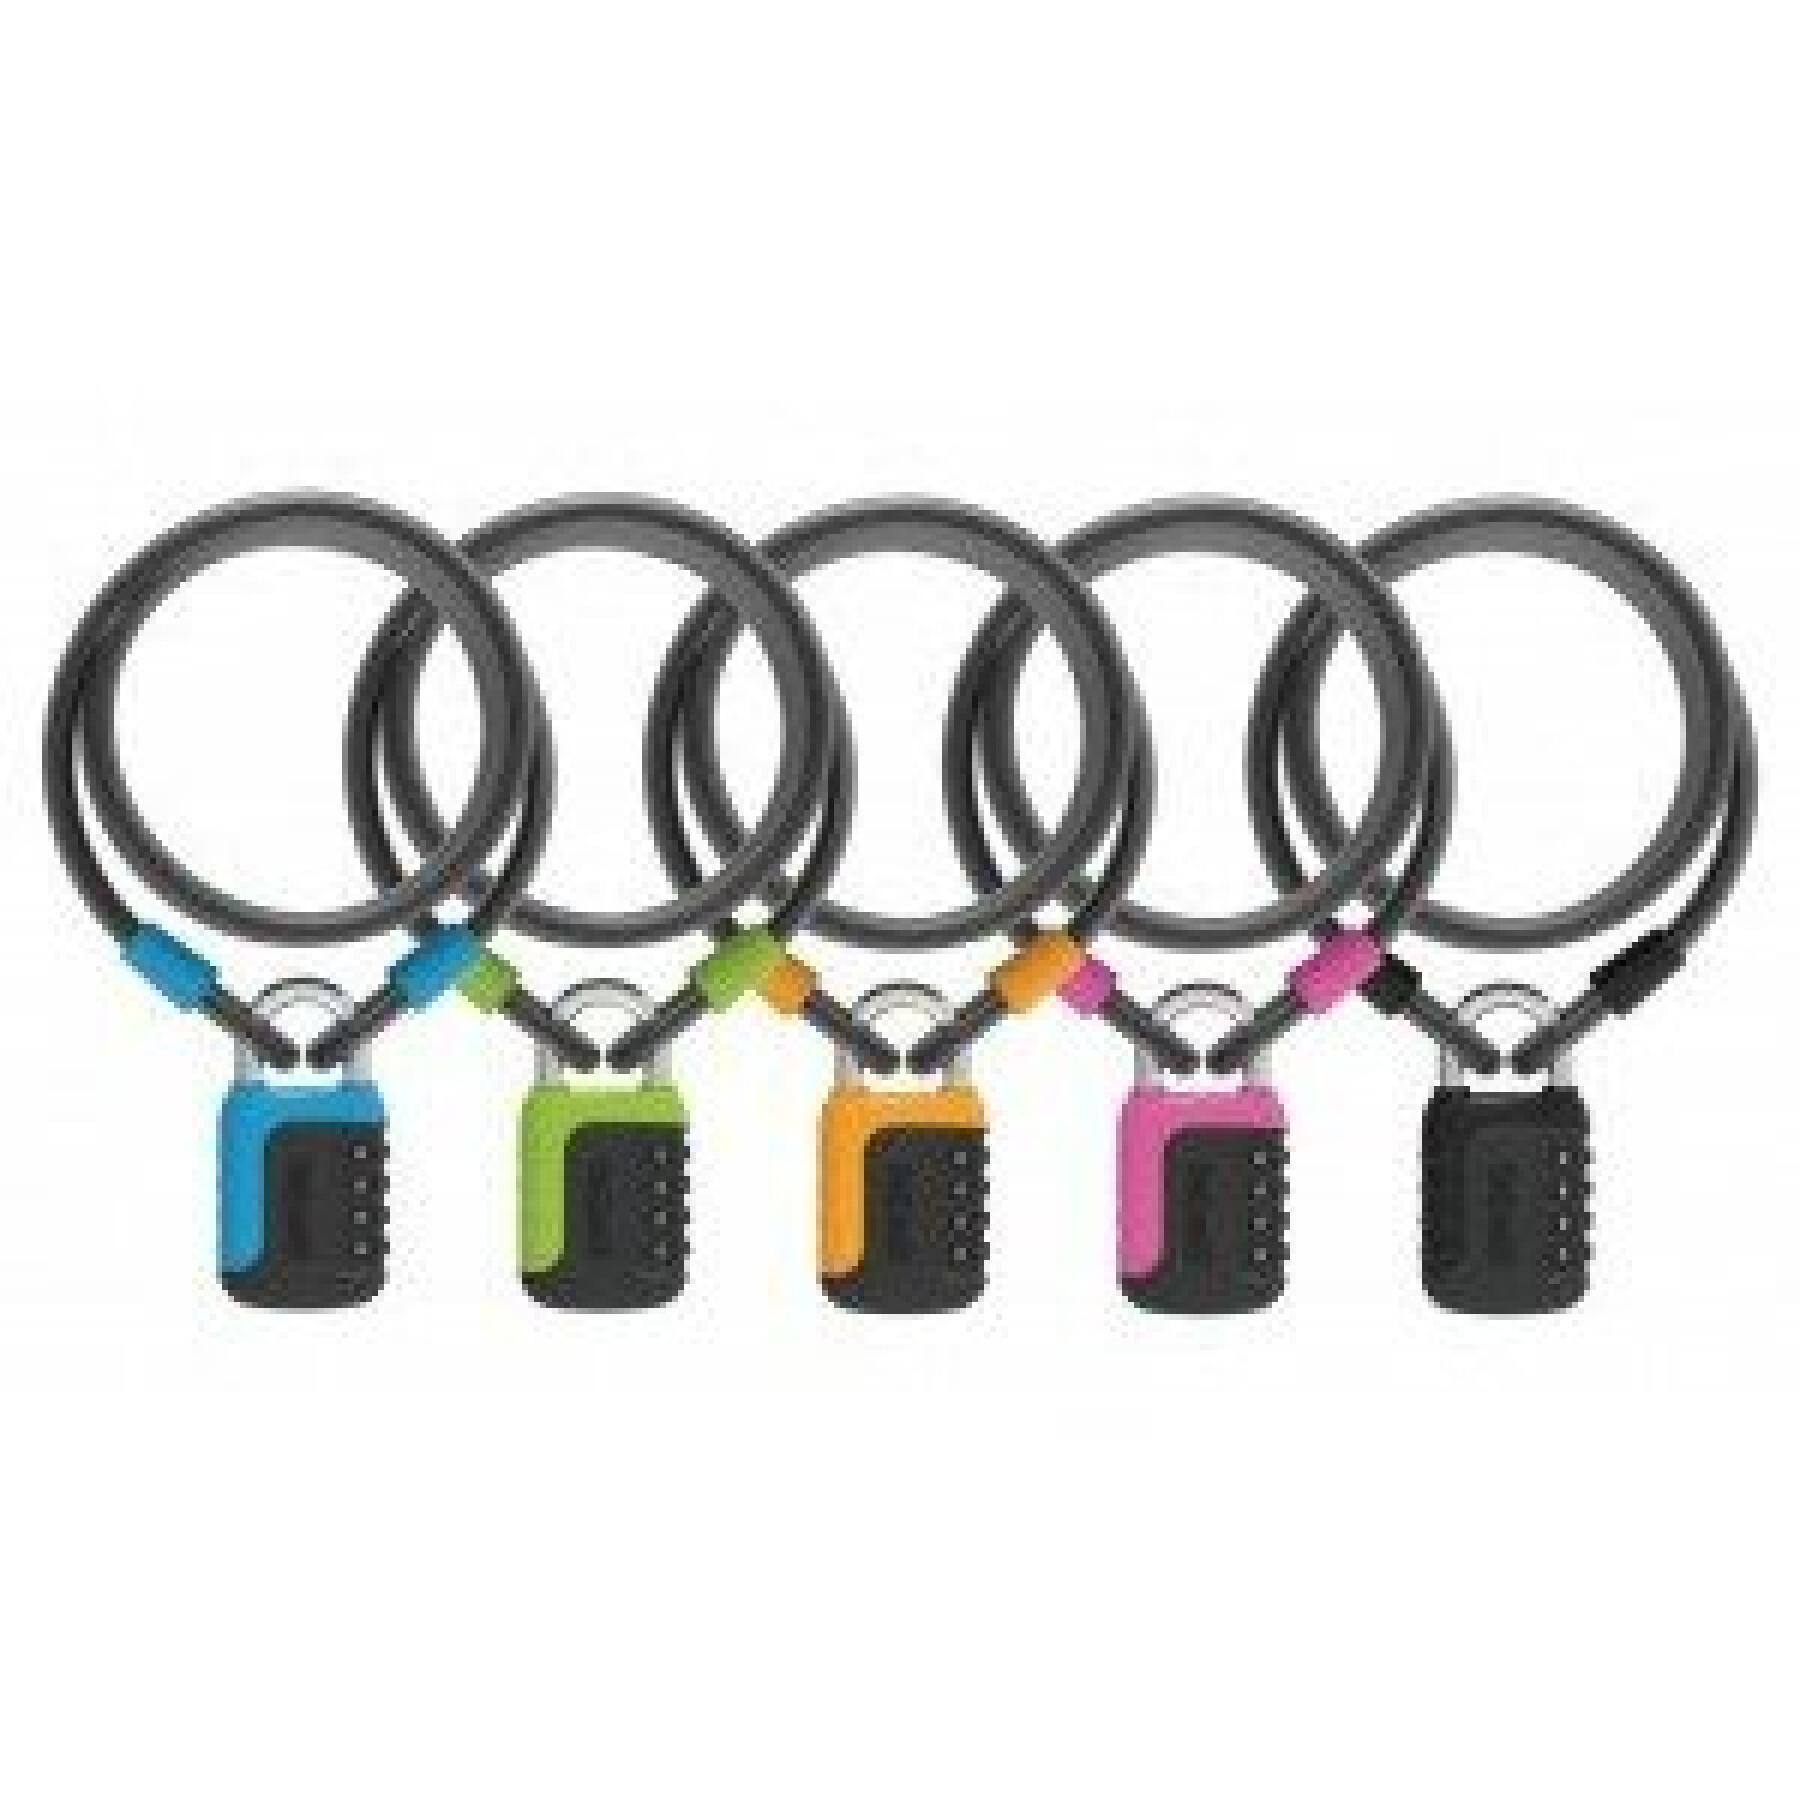 Cable lock Onguard Neon (x5)